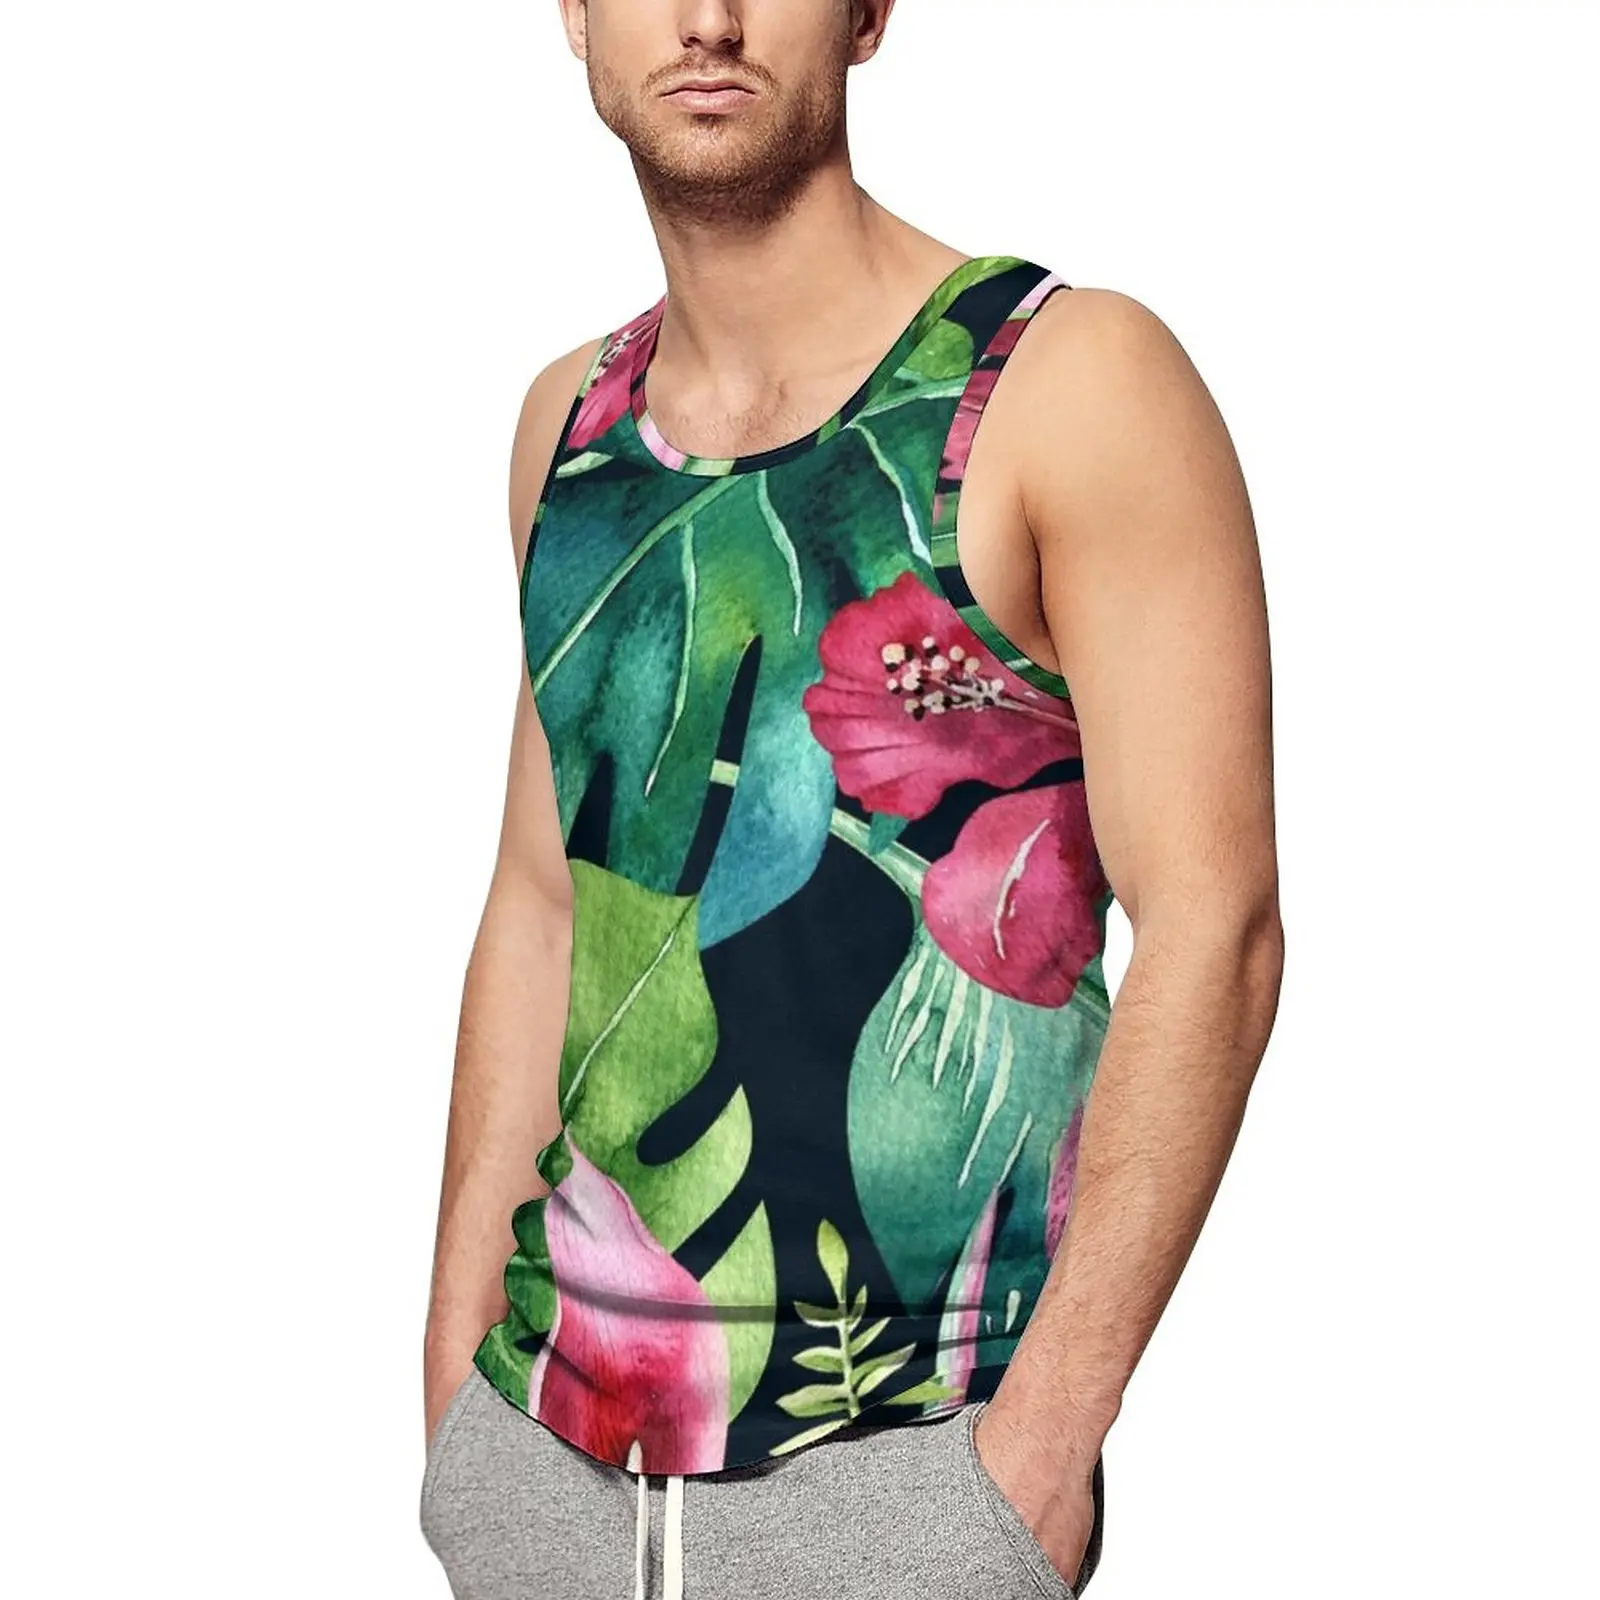 

Dark Tropical Tank Top Man's Hibiscus Leaves Print Streetwear Tops Summer Workout Graphic Sleeveless Vests Plus Size 4XL 5XL